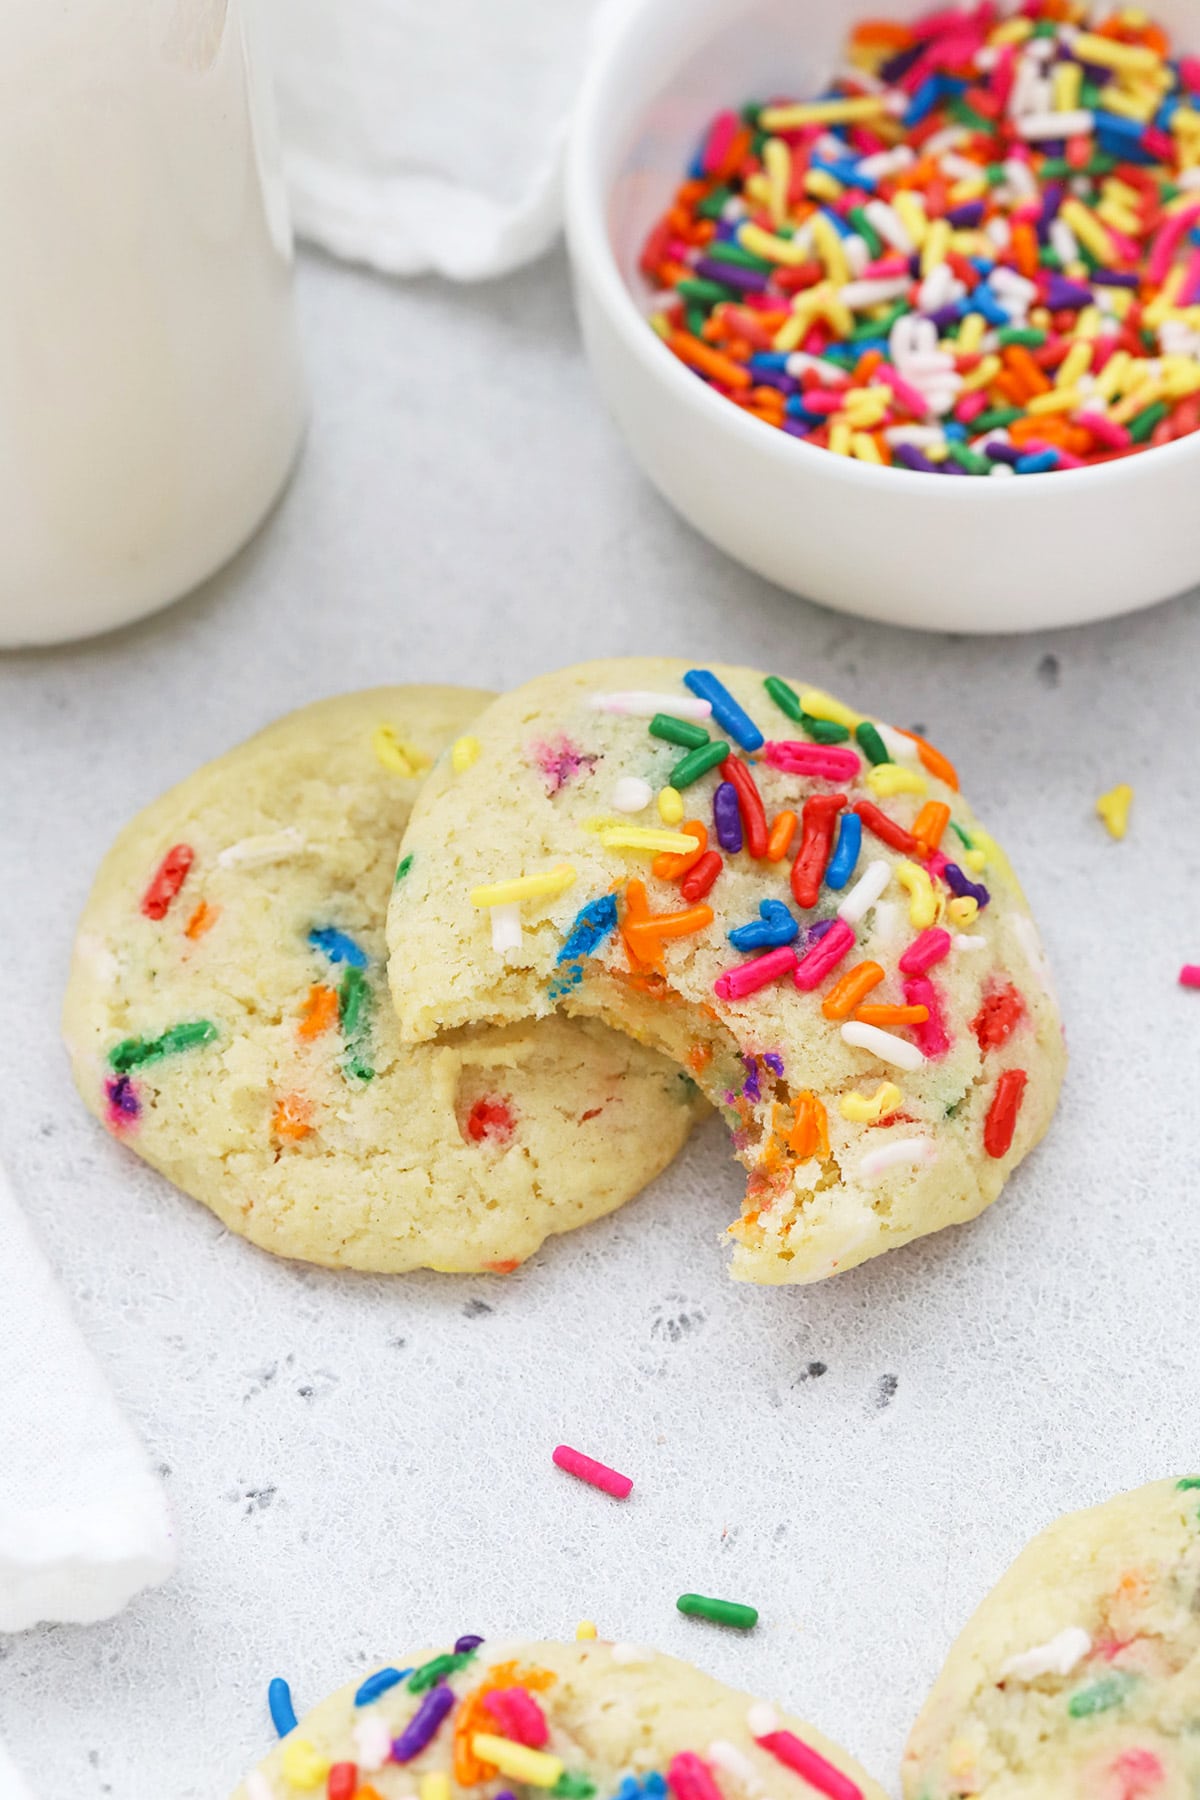 Gluten-free sprinkle sugar cookies stacked on top of each other. One has a bite taken out, revealing a soft gluten-free sugar cookie center